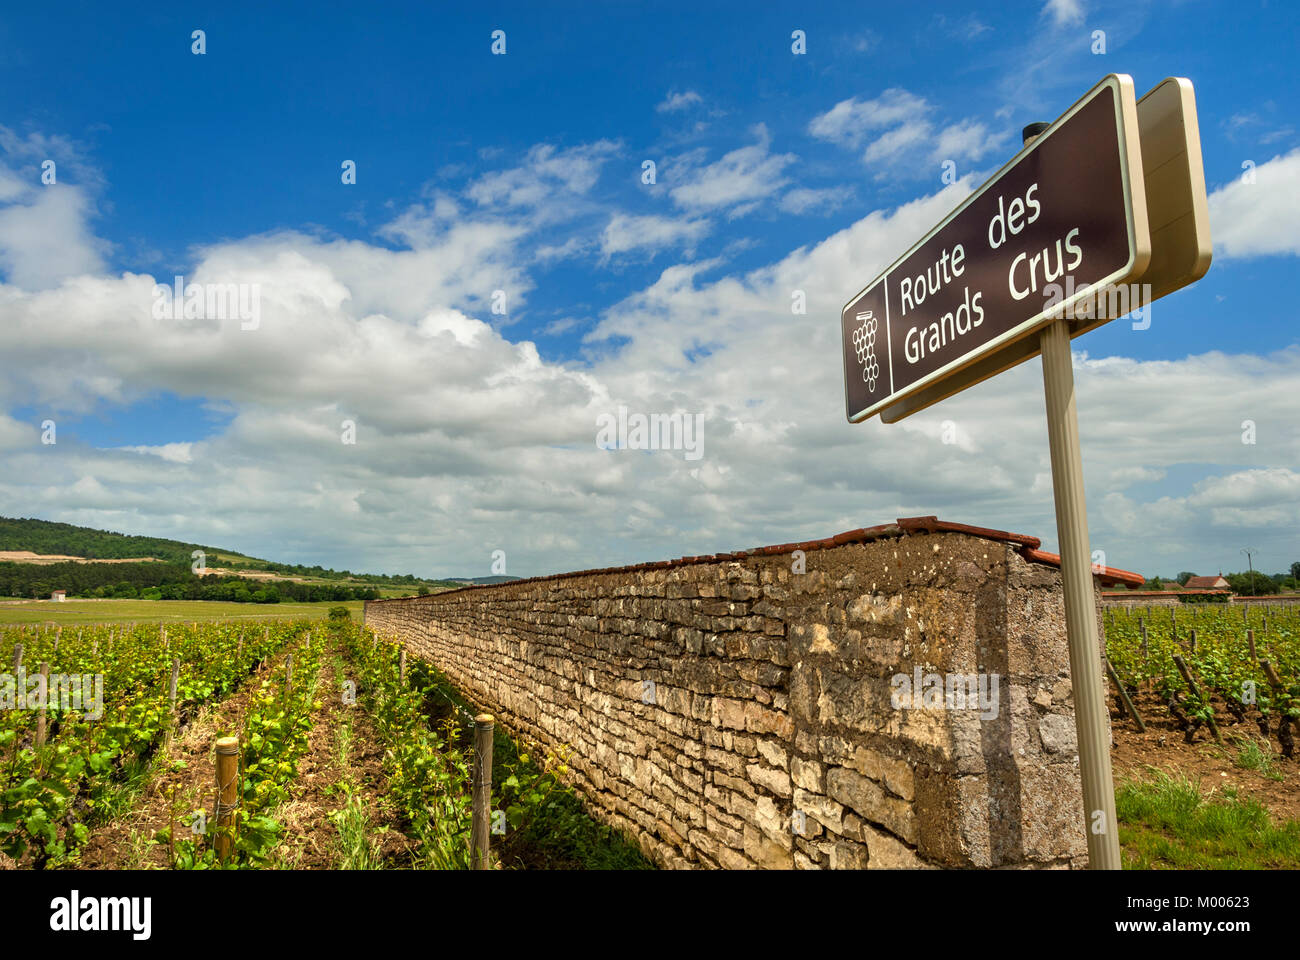 PULIGNY MONTRACHET Route des Grands Crus sign at the vineyards of Puligny Montrachet, with Hill of Corton landscape in background Cote d Or France Stock Photo